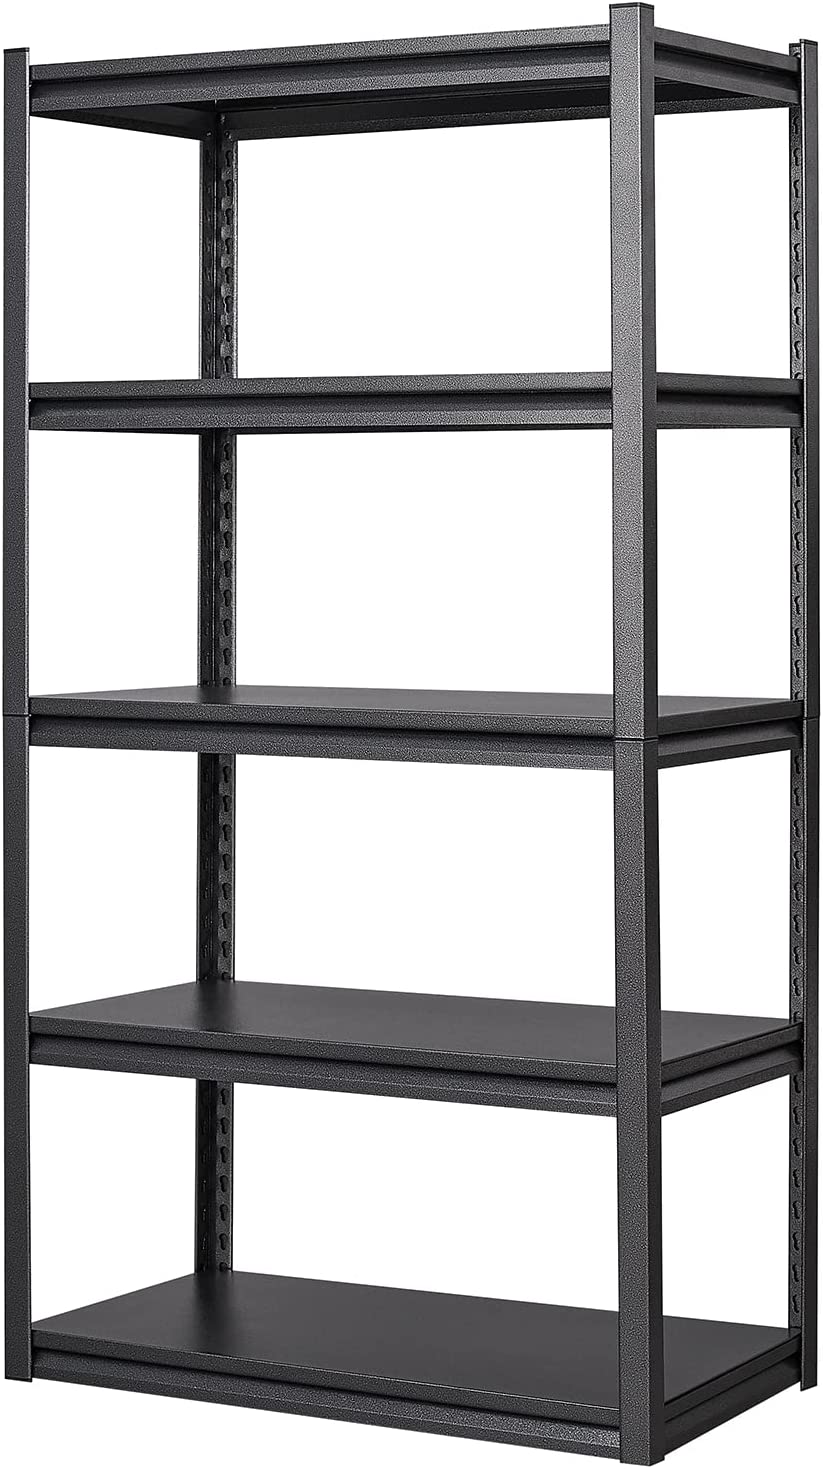 Highly Polished Mobile Chrome 5 Tier Shelving unit Free Next Day Delivery ** Commercial Quality Racking Solutions HEAVY DUTY 1838mm H x 907mm W x 457mm D 